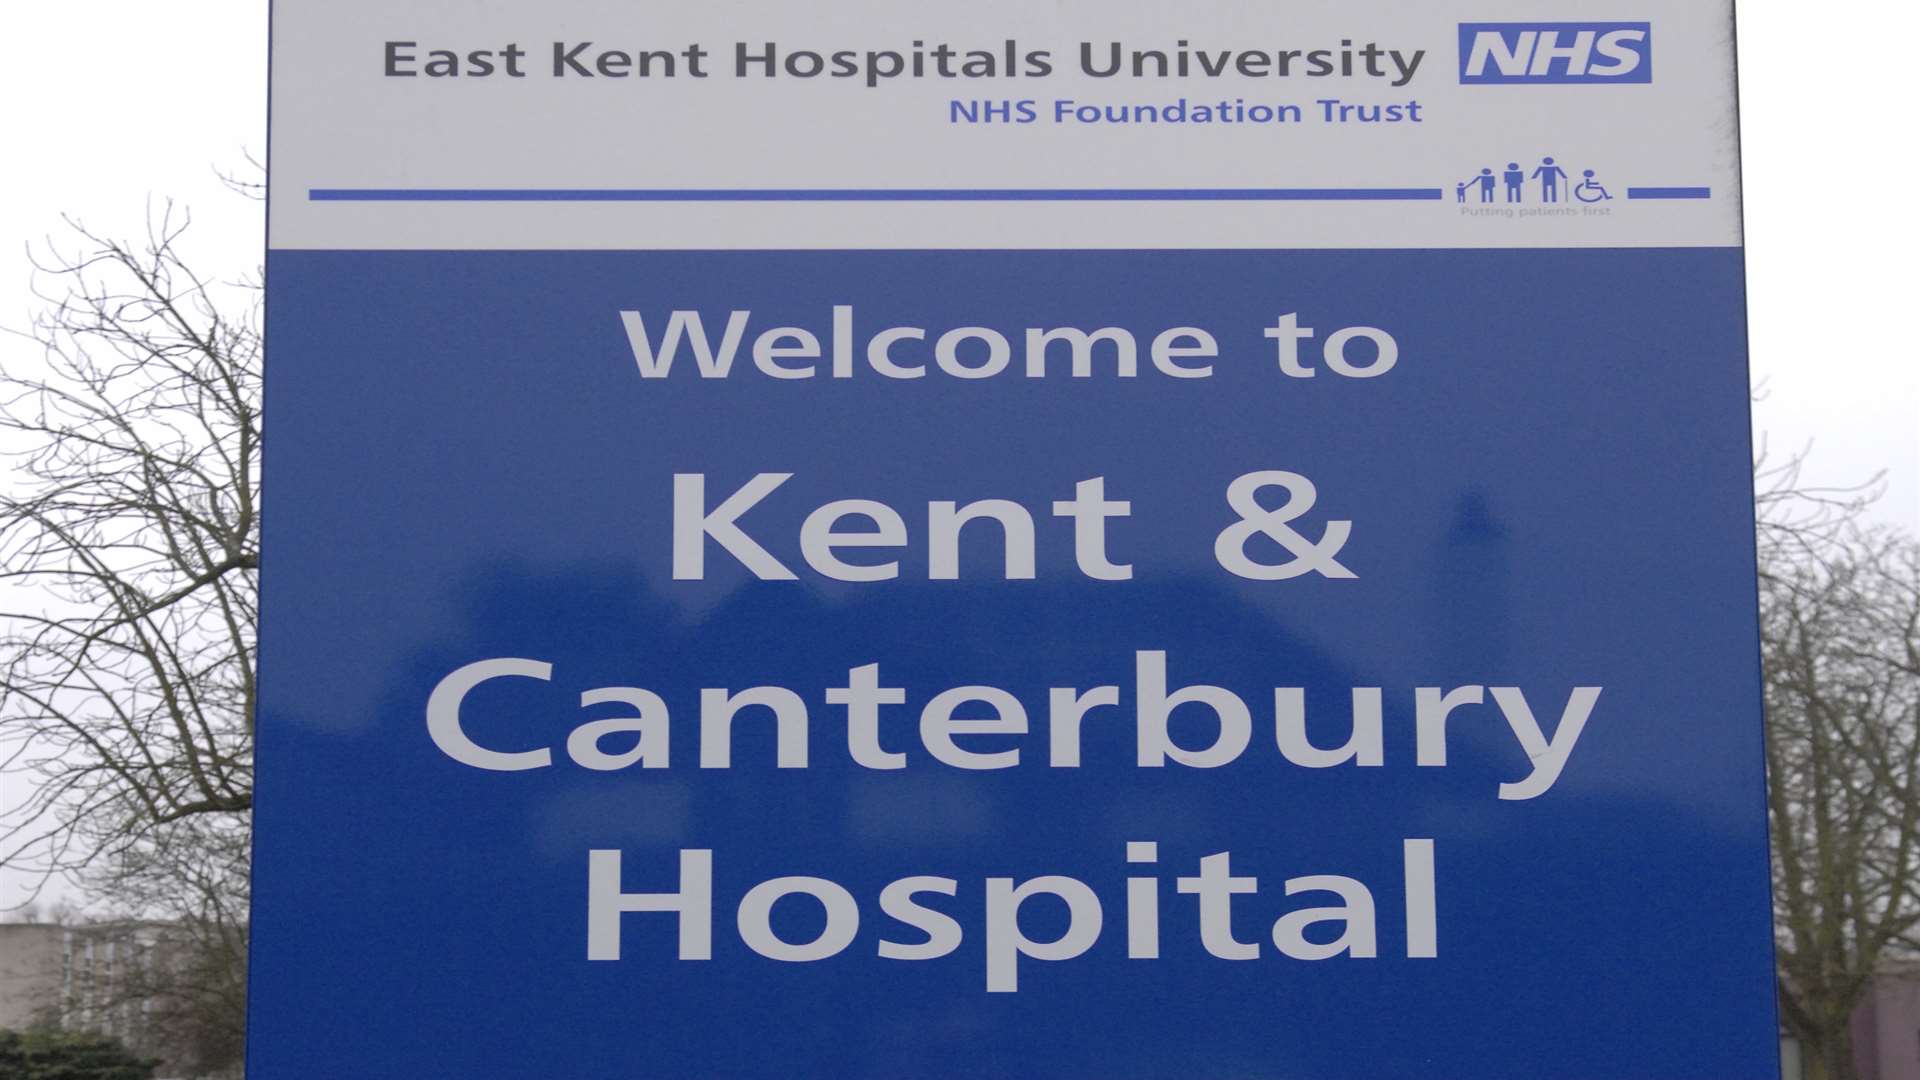 Acute stroke patients in Canterbury face journeys to Margate or Ashford.